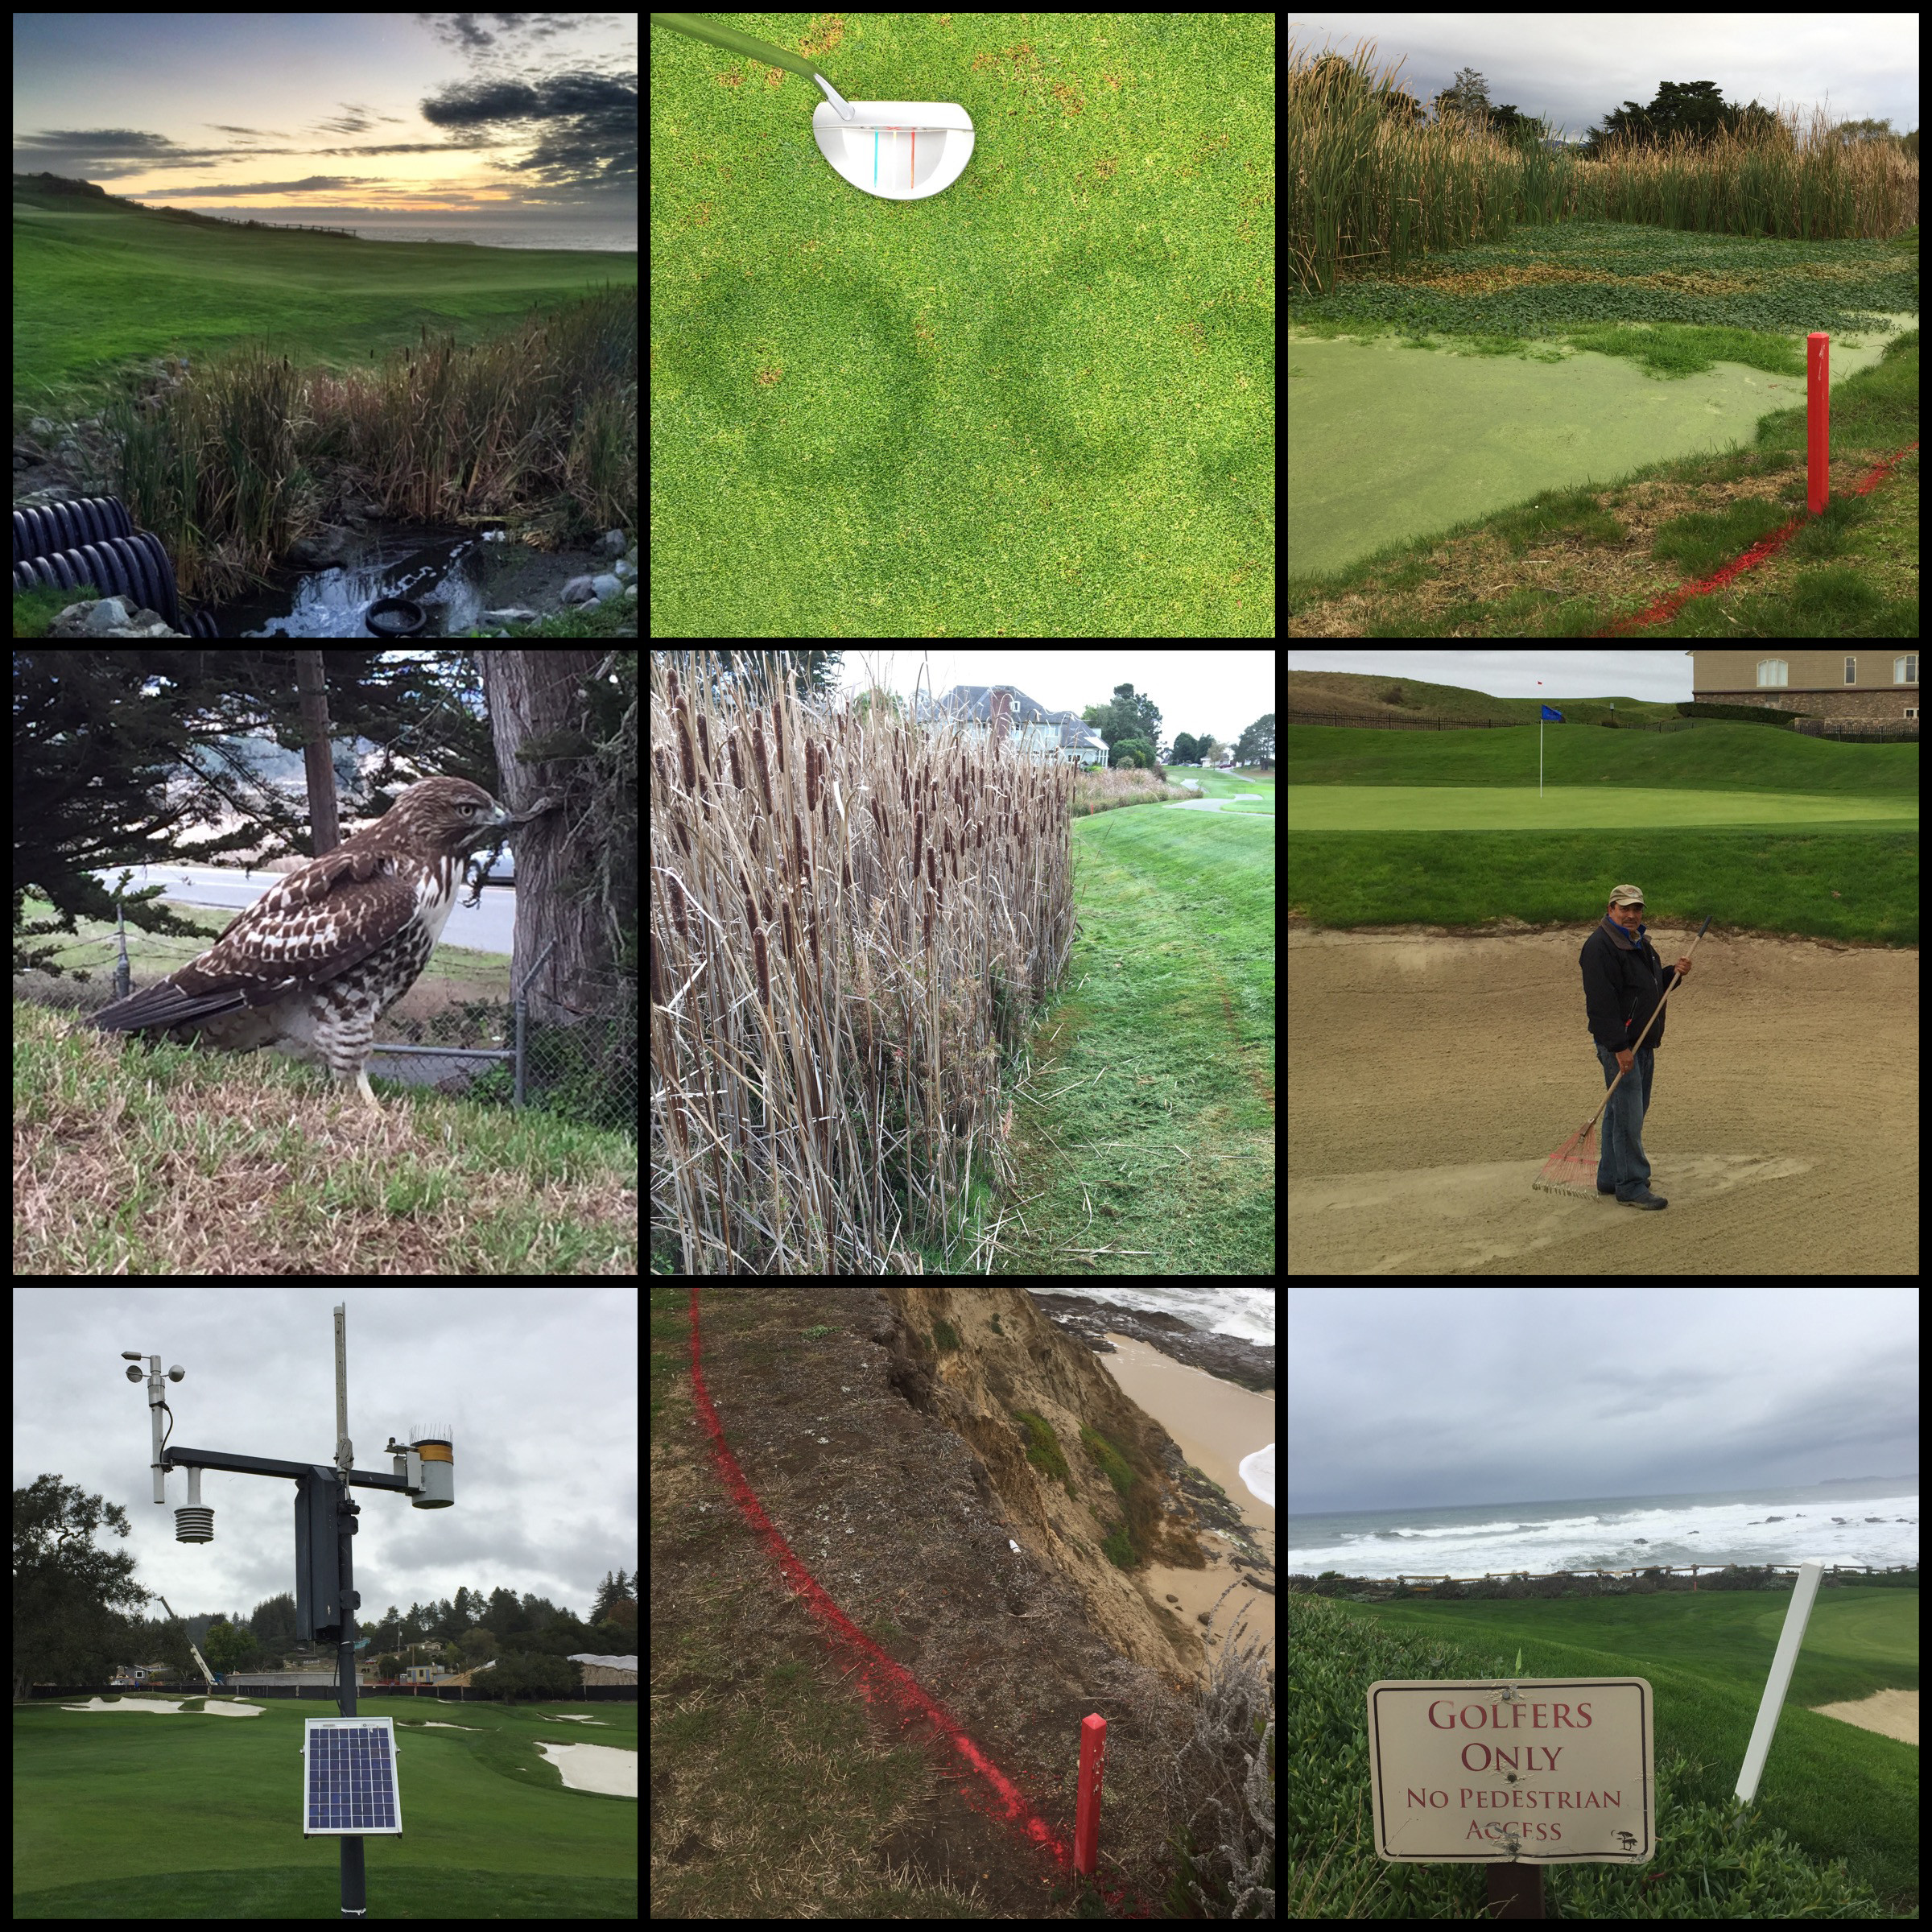 images demonstrating the sustainability of golf